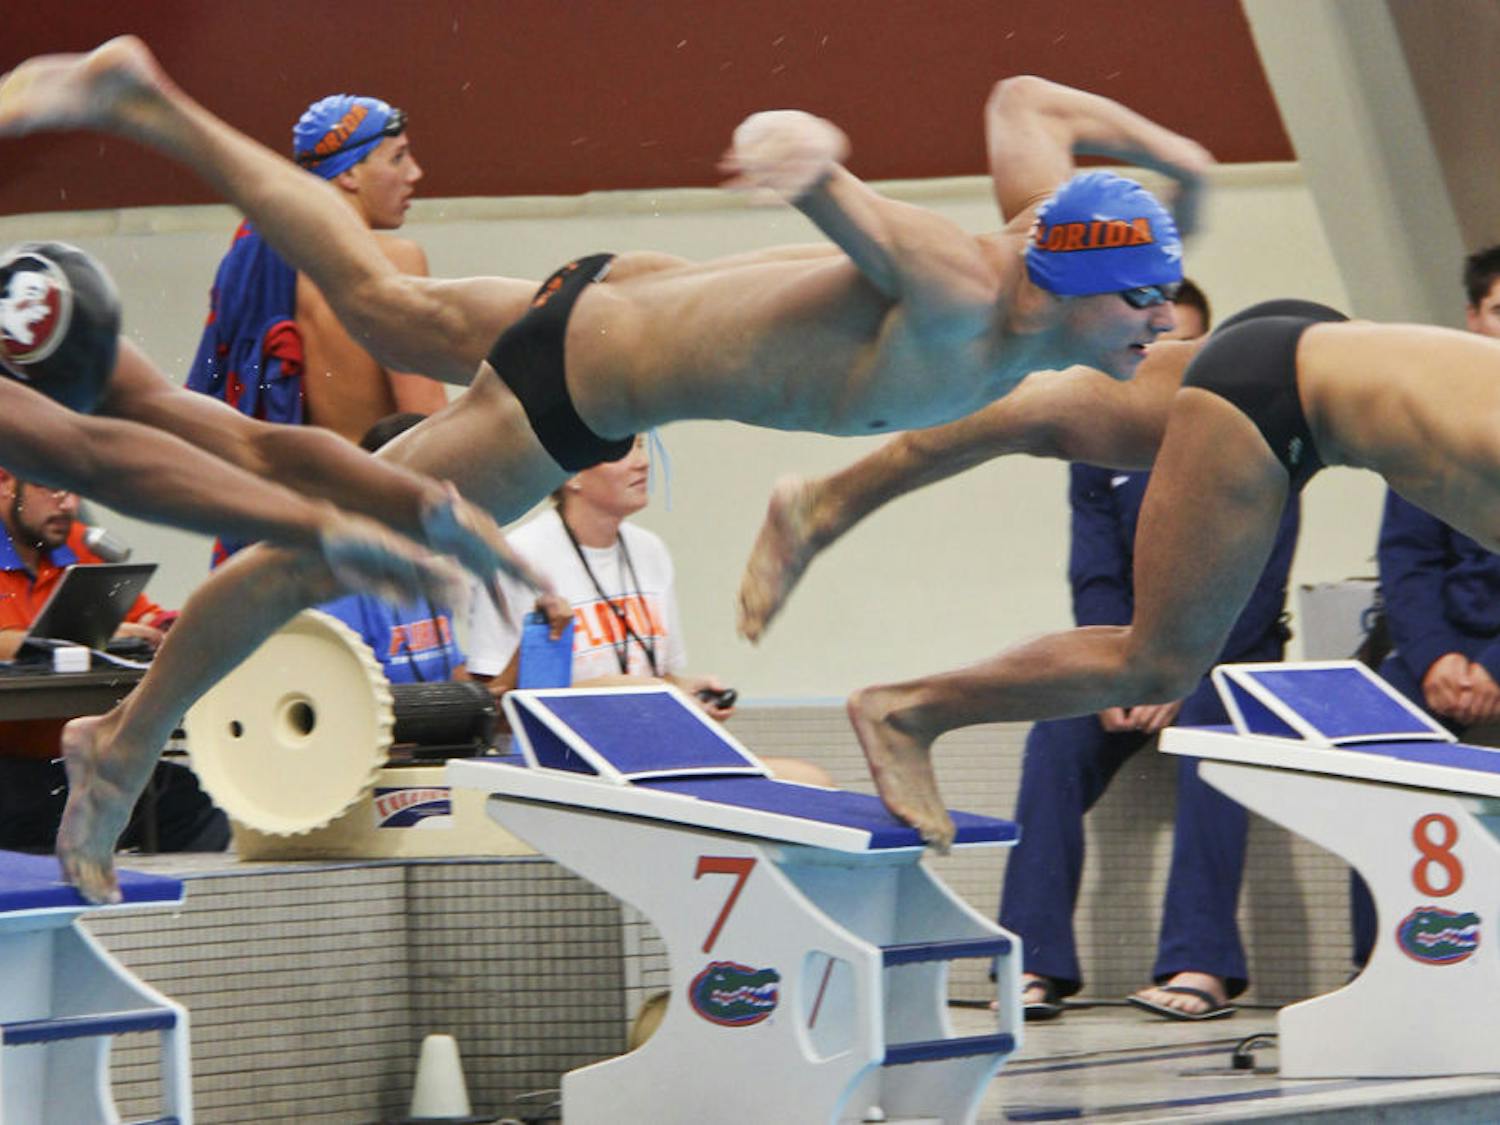 Freshman Caeleb Dressel jumps into the pool at the start of the 200-yard breaststroke event during Day 3 of the 2014 Pinch A Penny Invitational